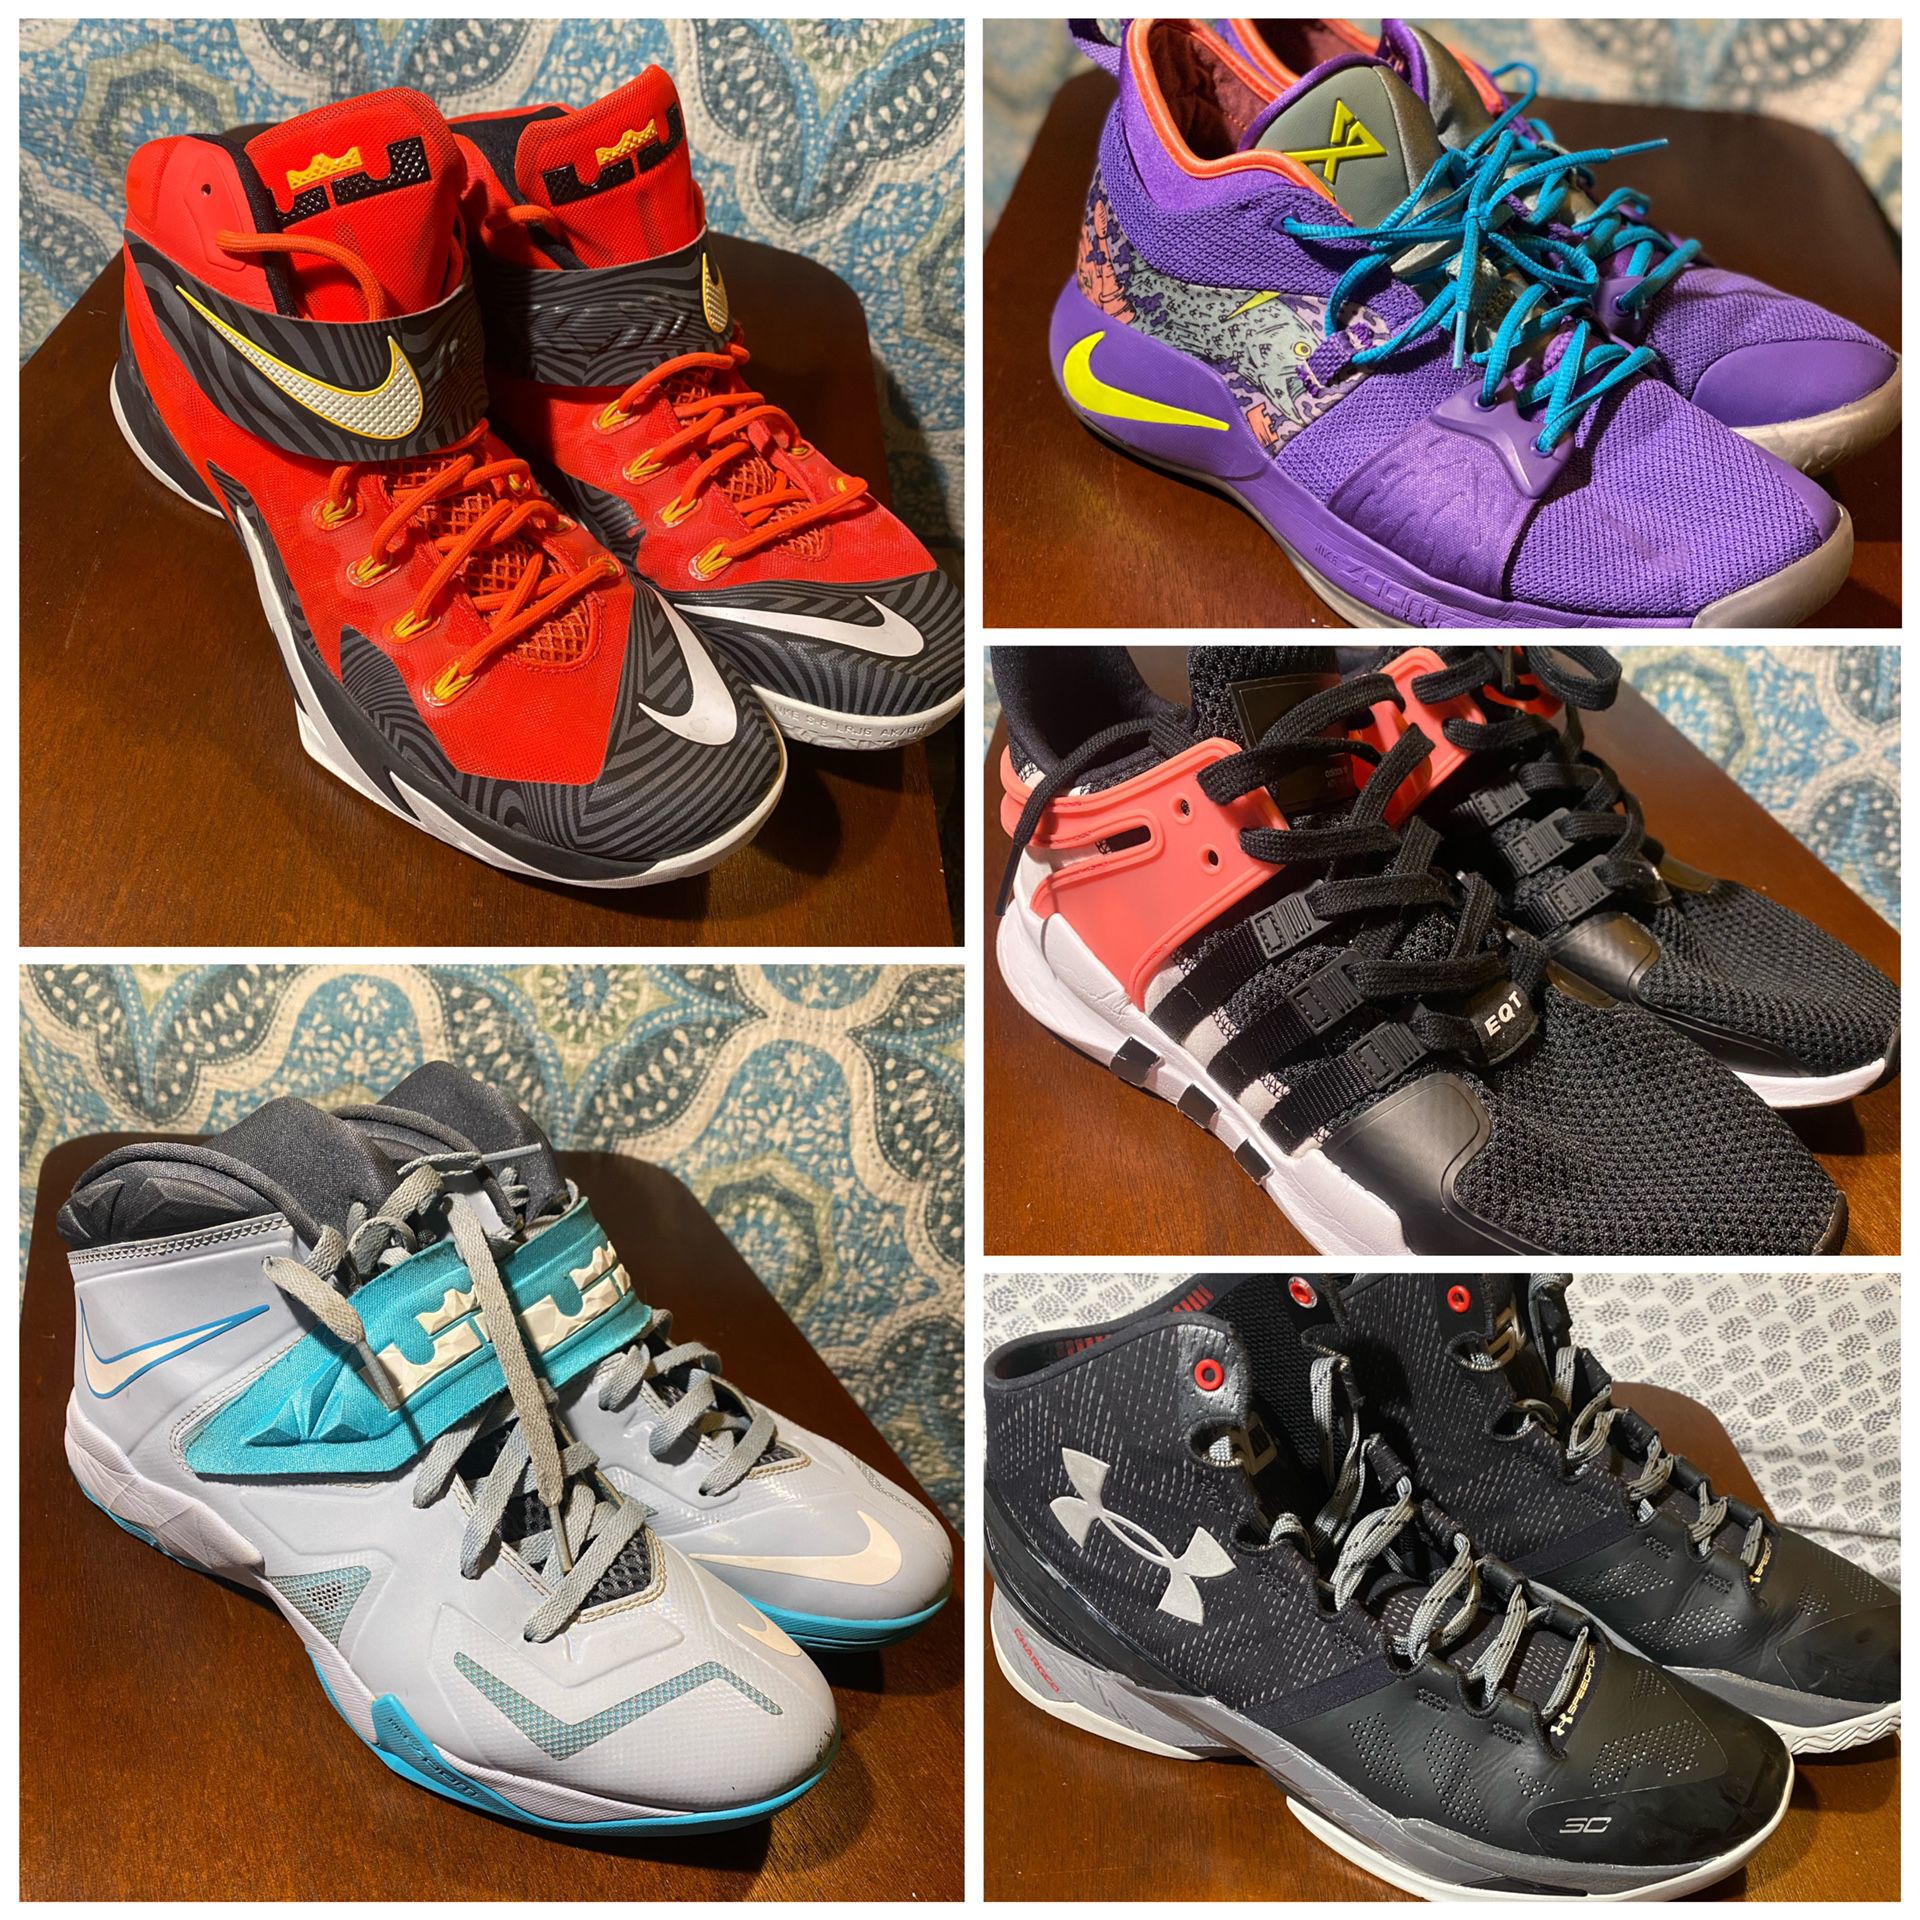 Shoe collection: lebrons, under armor, Nike, adidas, Paul George